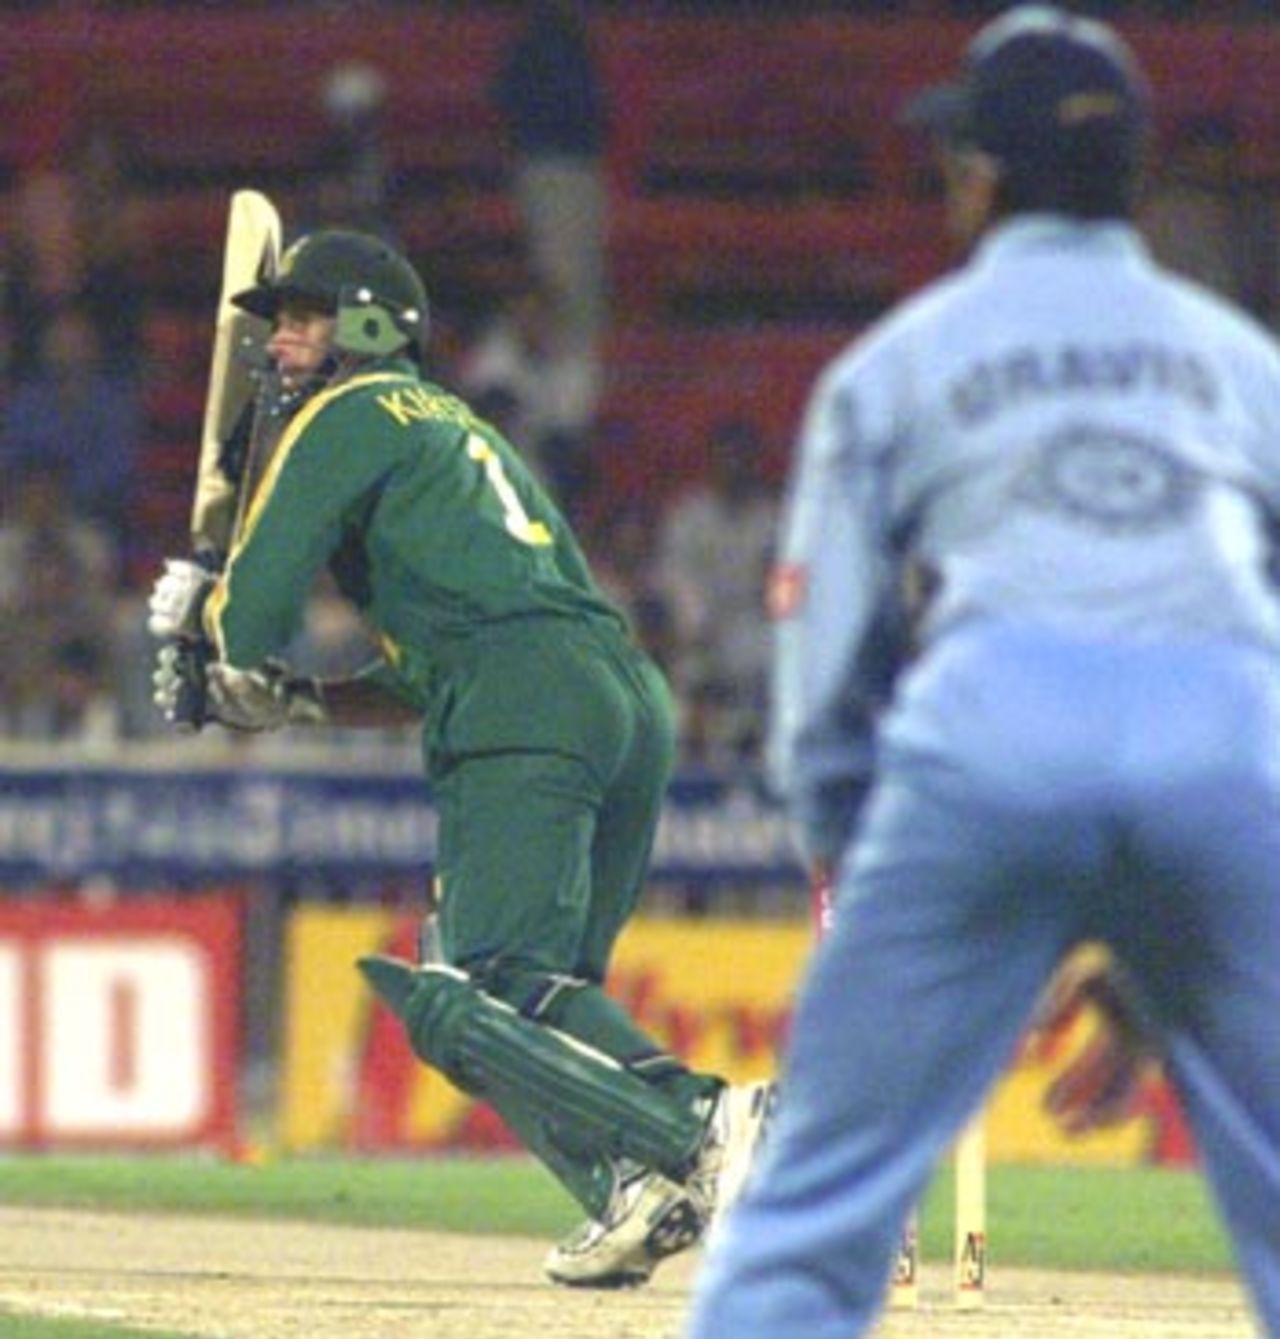 South African opener Gary Kirsten in action, Coca-Cola Cup 1999/00, Sharjah C.A. Stadium, 27 March 2000